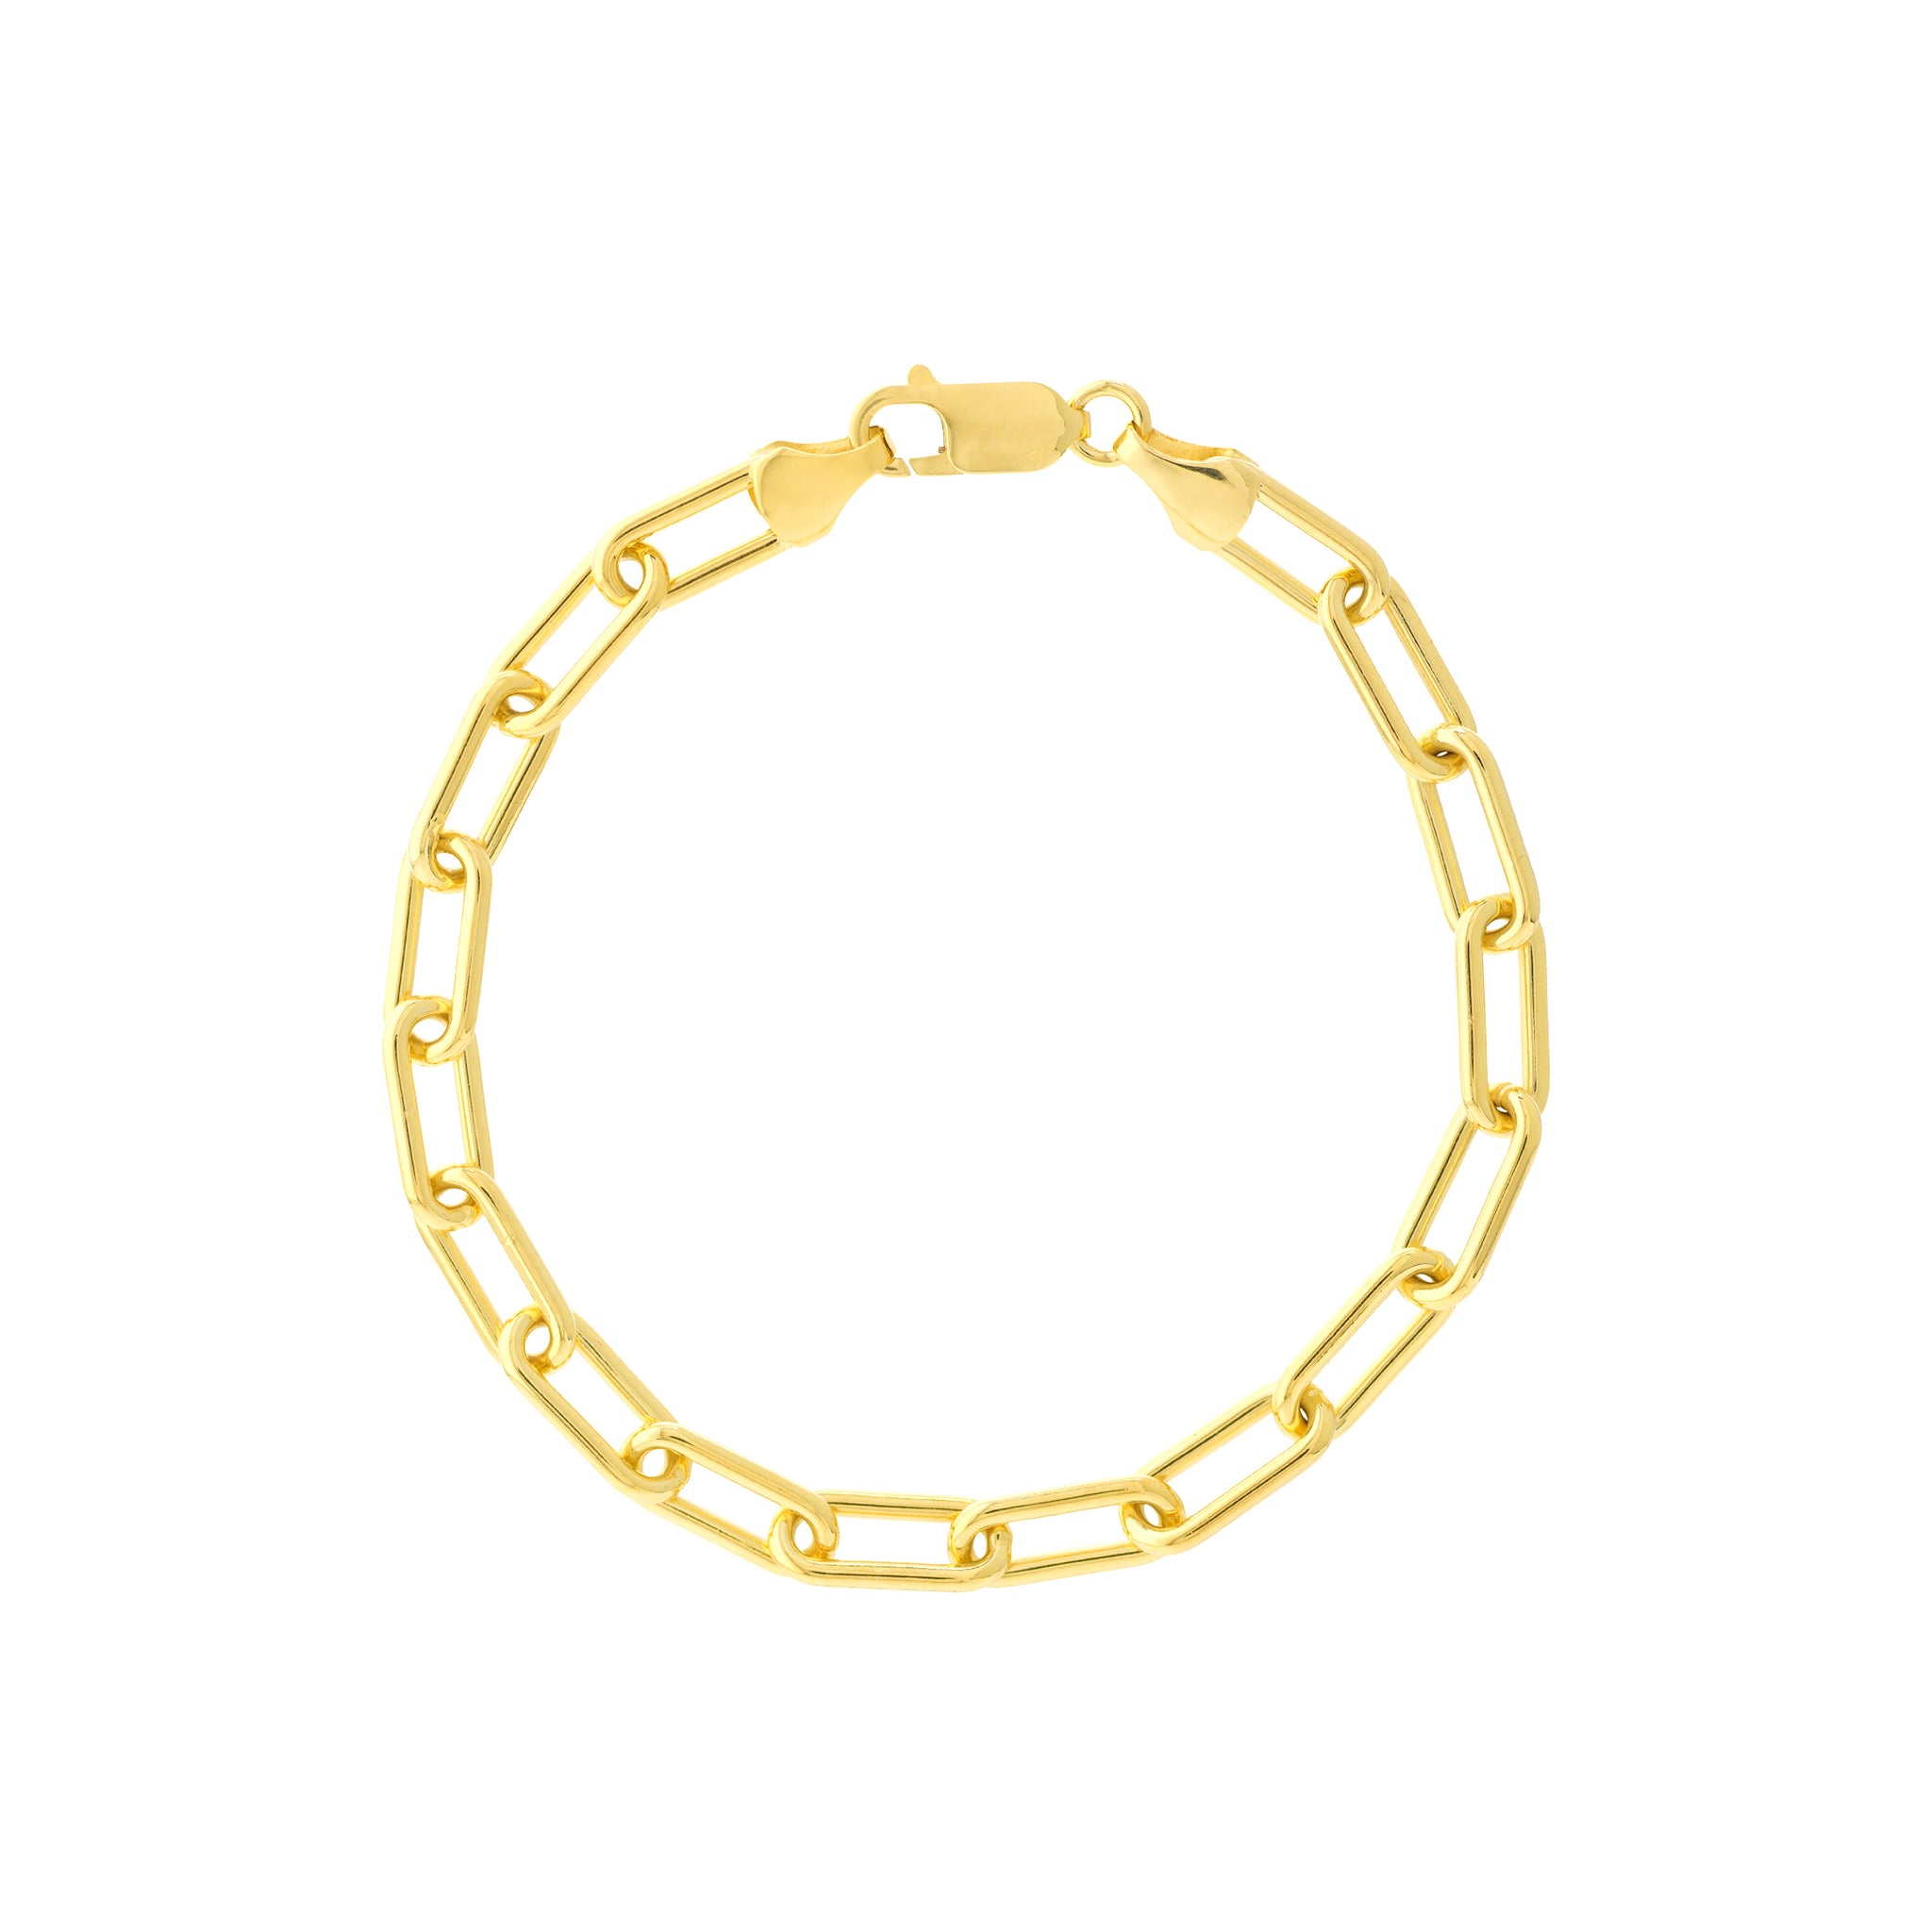 Hemsleys Collection 14K Yellow Gold 6mm Paperclip Bracelet